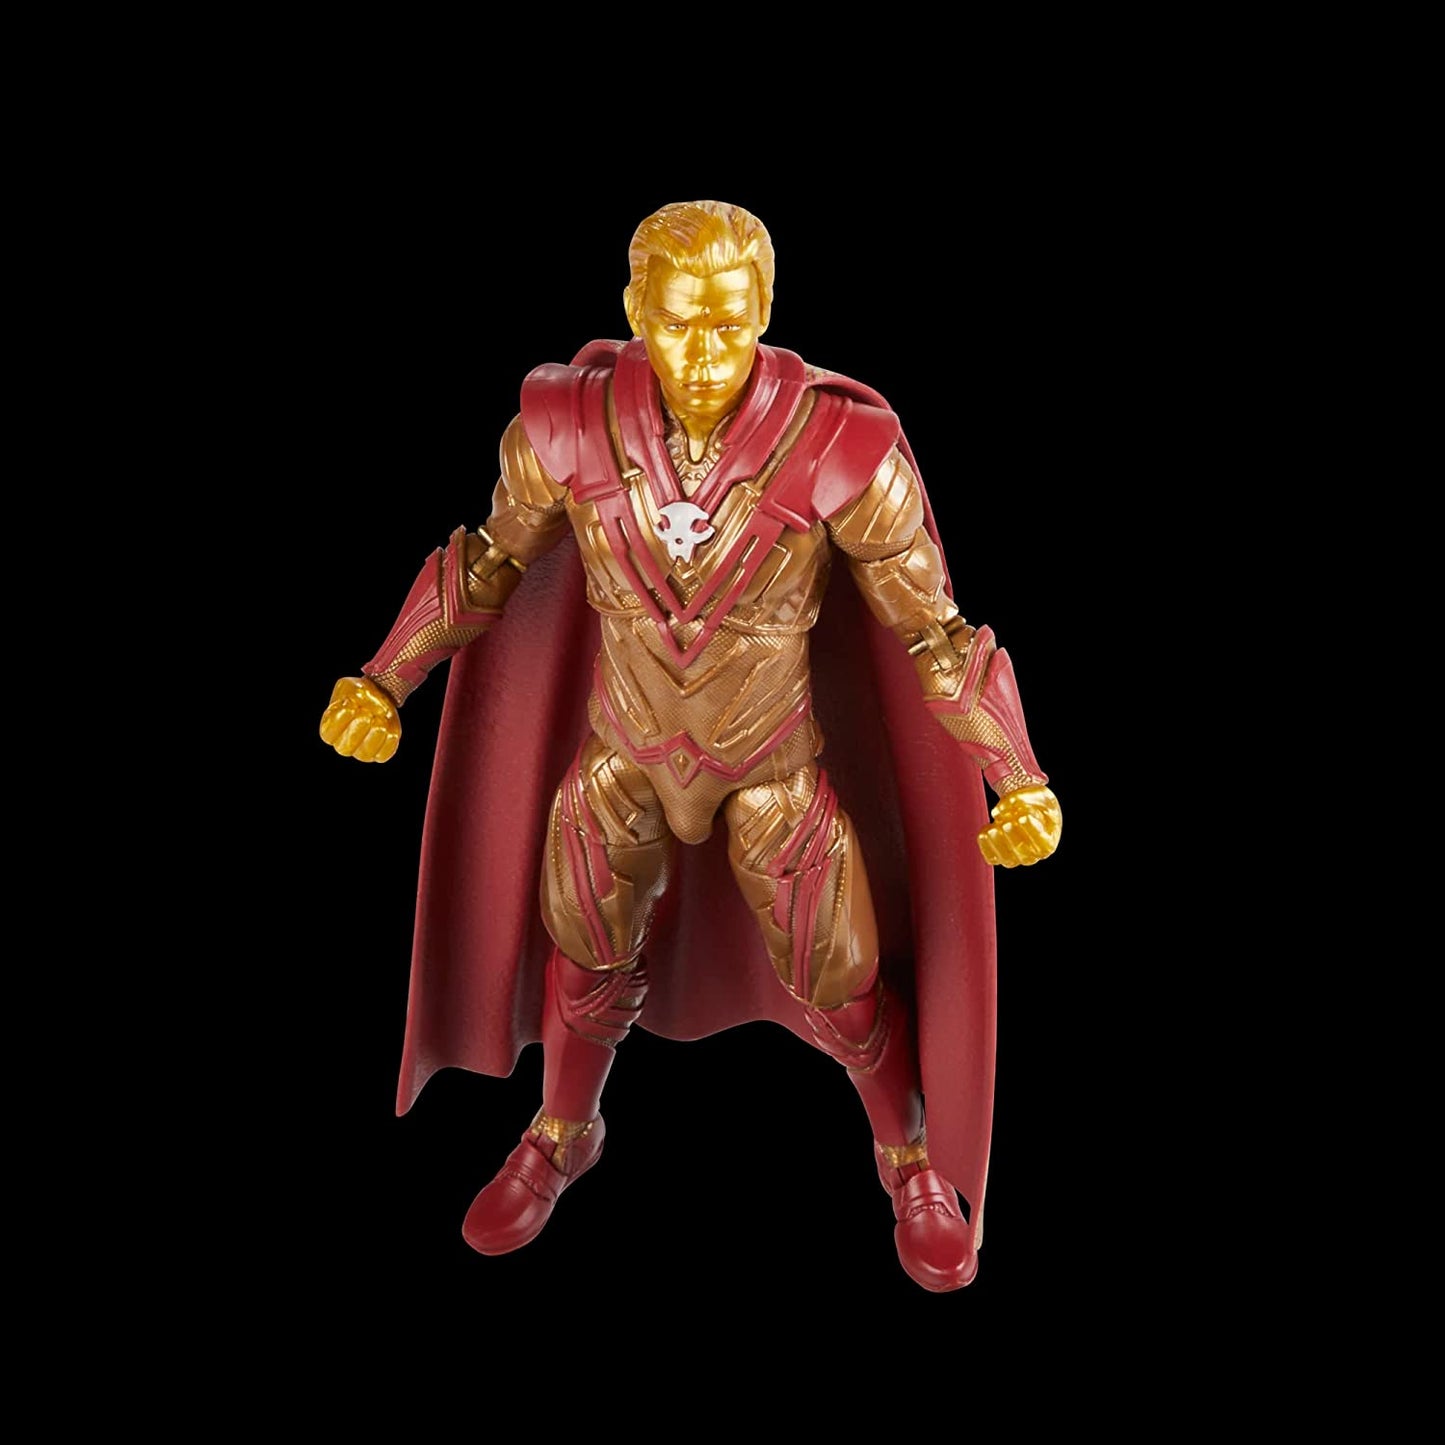  Guardians of the Galaxy Vol. 3 Marvel Legends Adam Warlock 6-Inch Action Figure Toy top view - Heretoserveyou